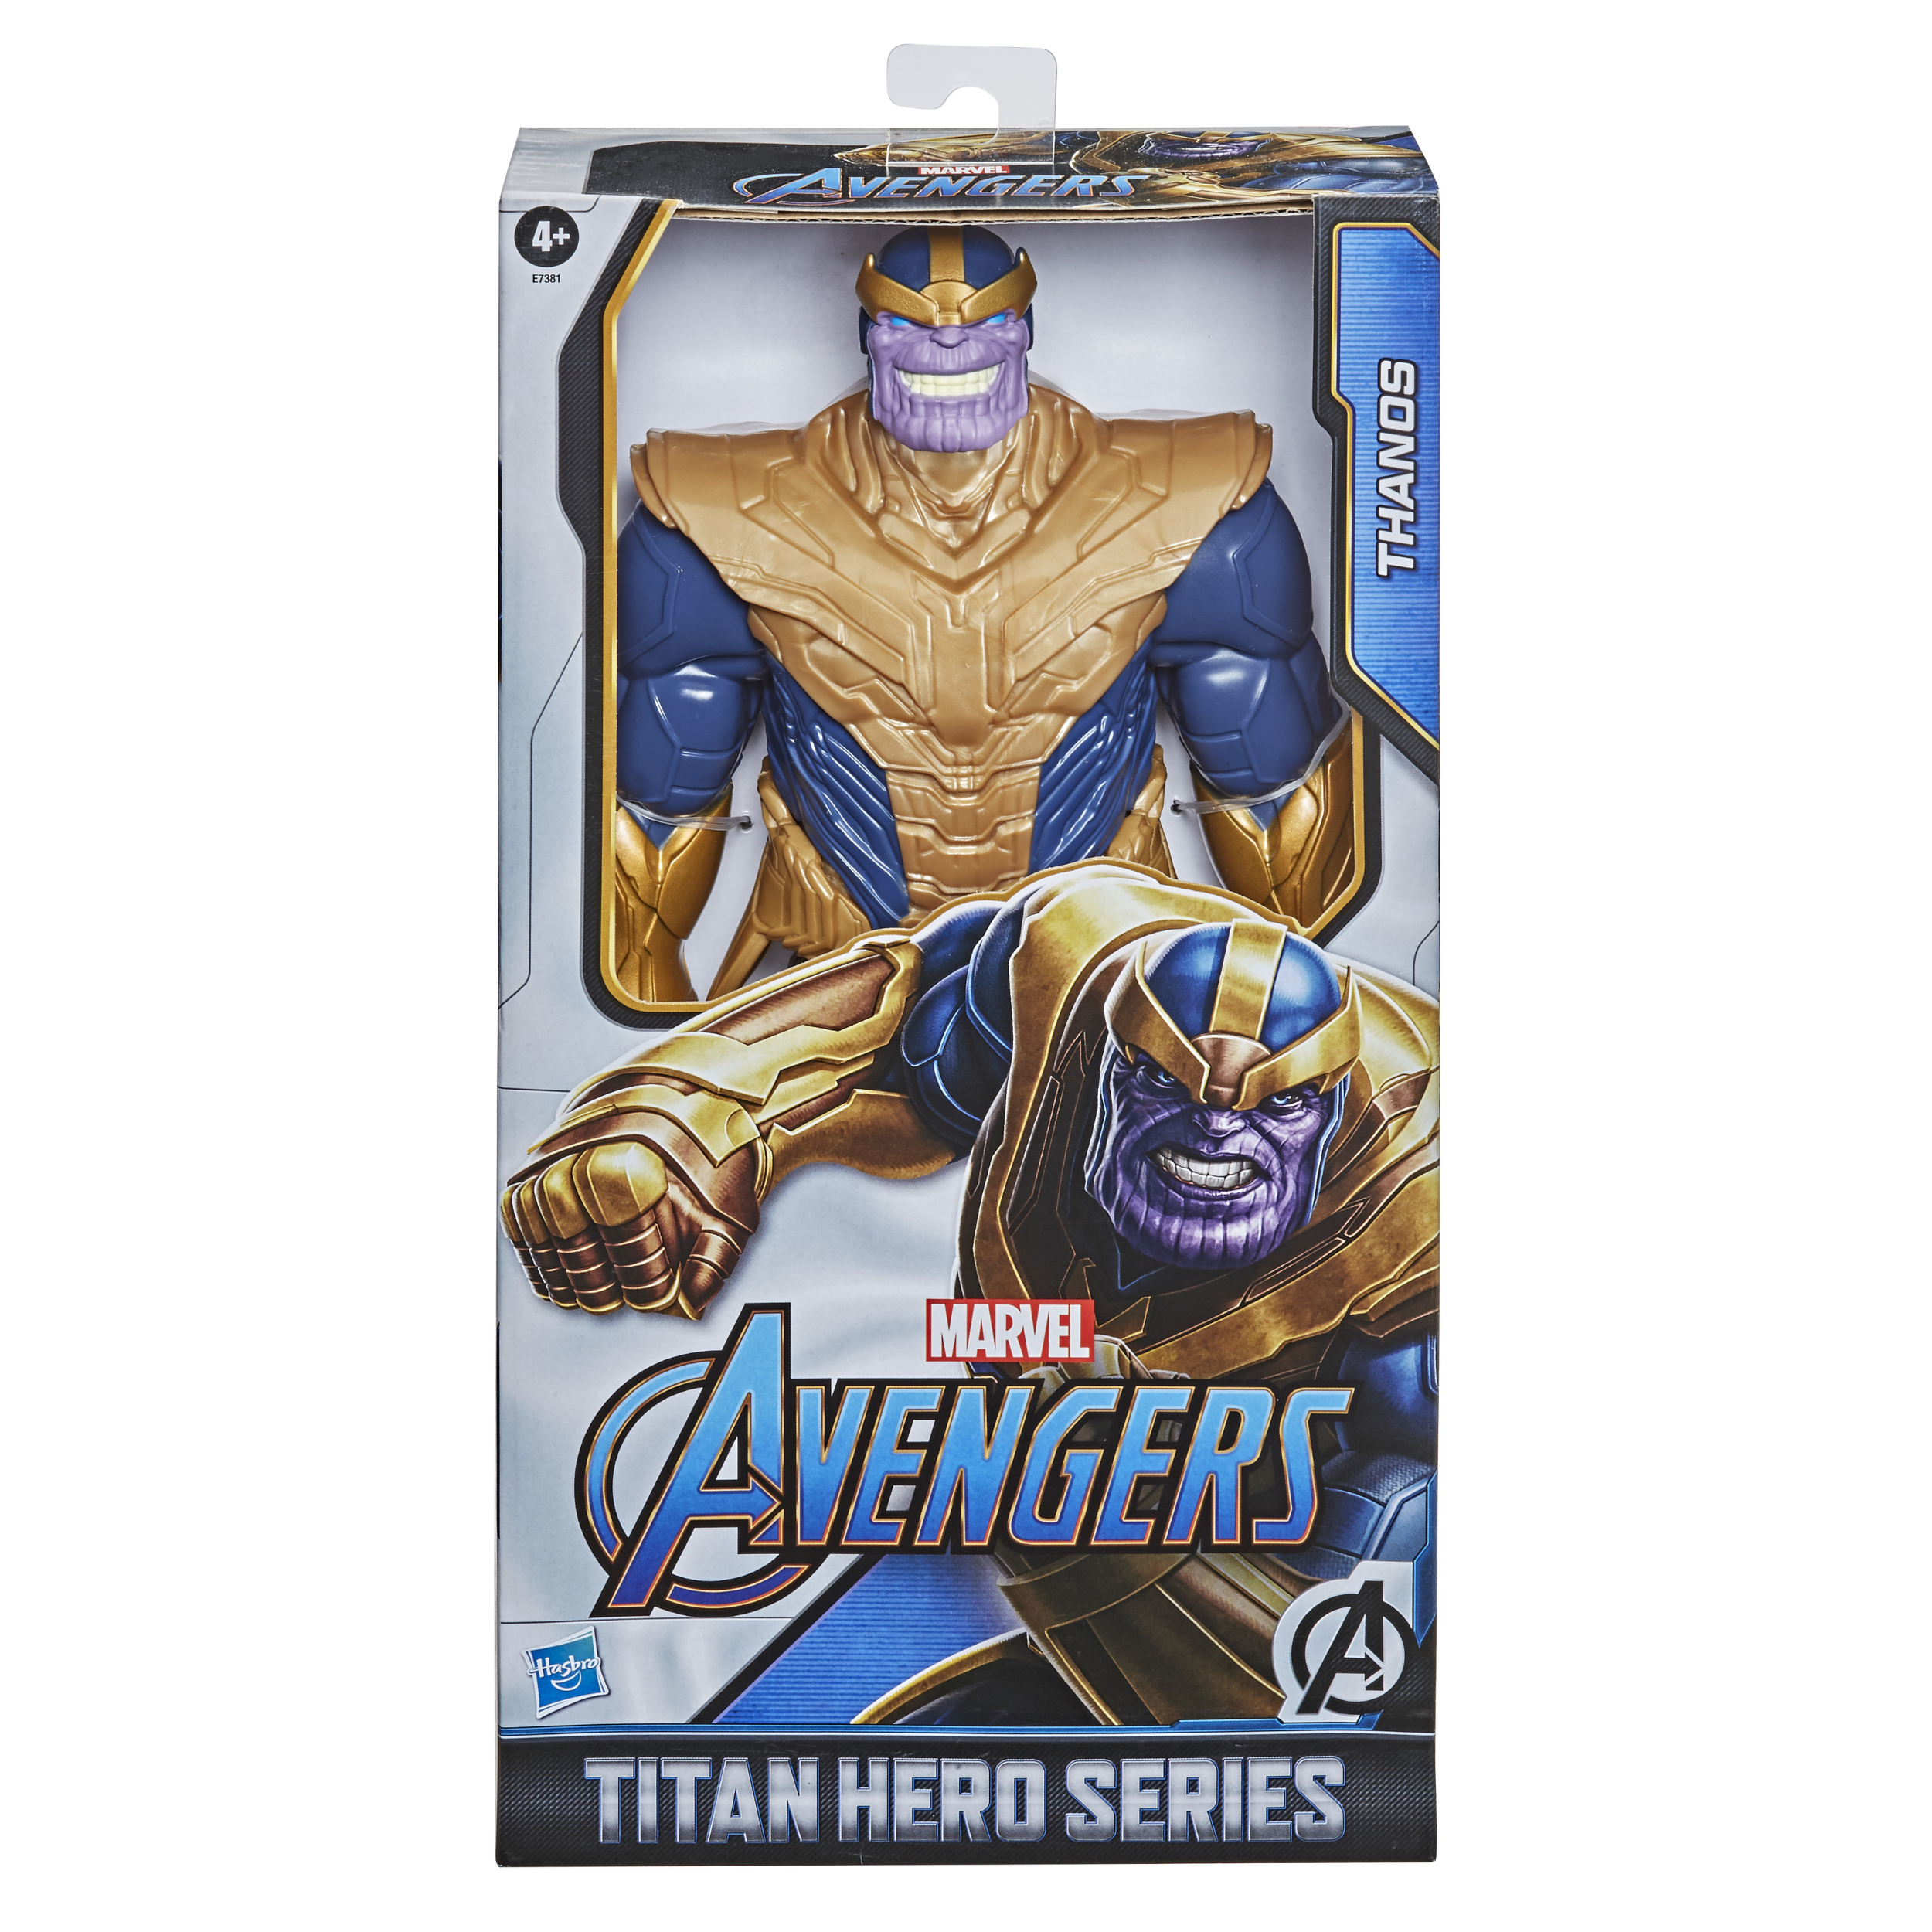 Marvel Avengers Titan Hero Series Blast Gear Deluxe Thanos Action Figure, 12-Inch Toy, For Kids Ages 4 And Up - Mod: HSBE73815L2